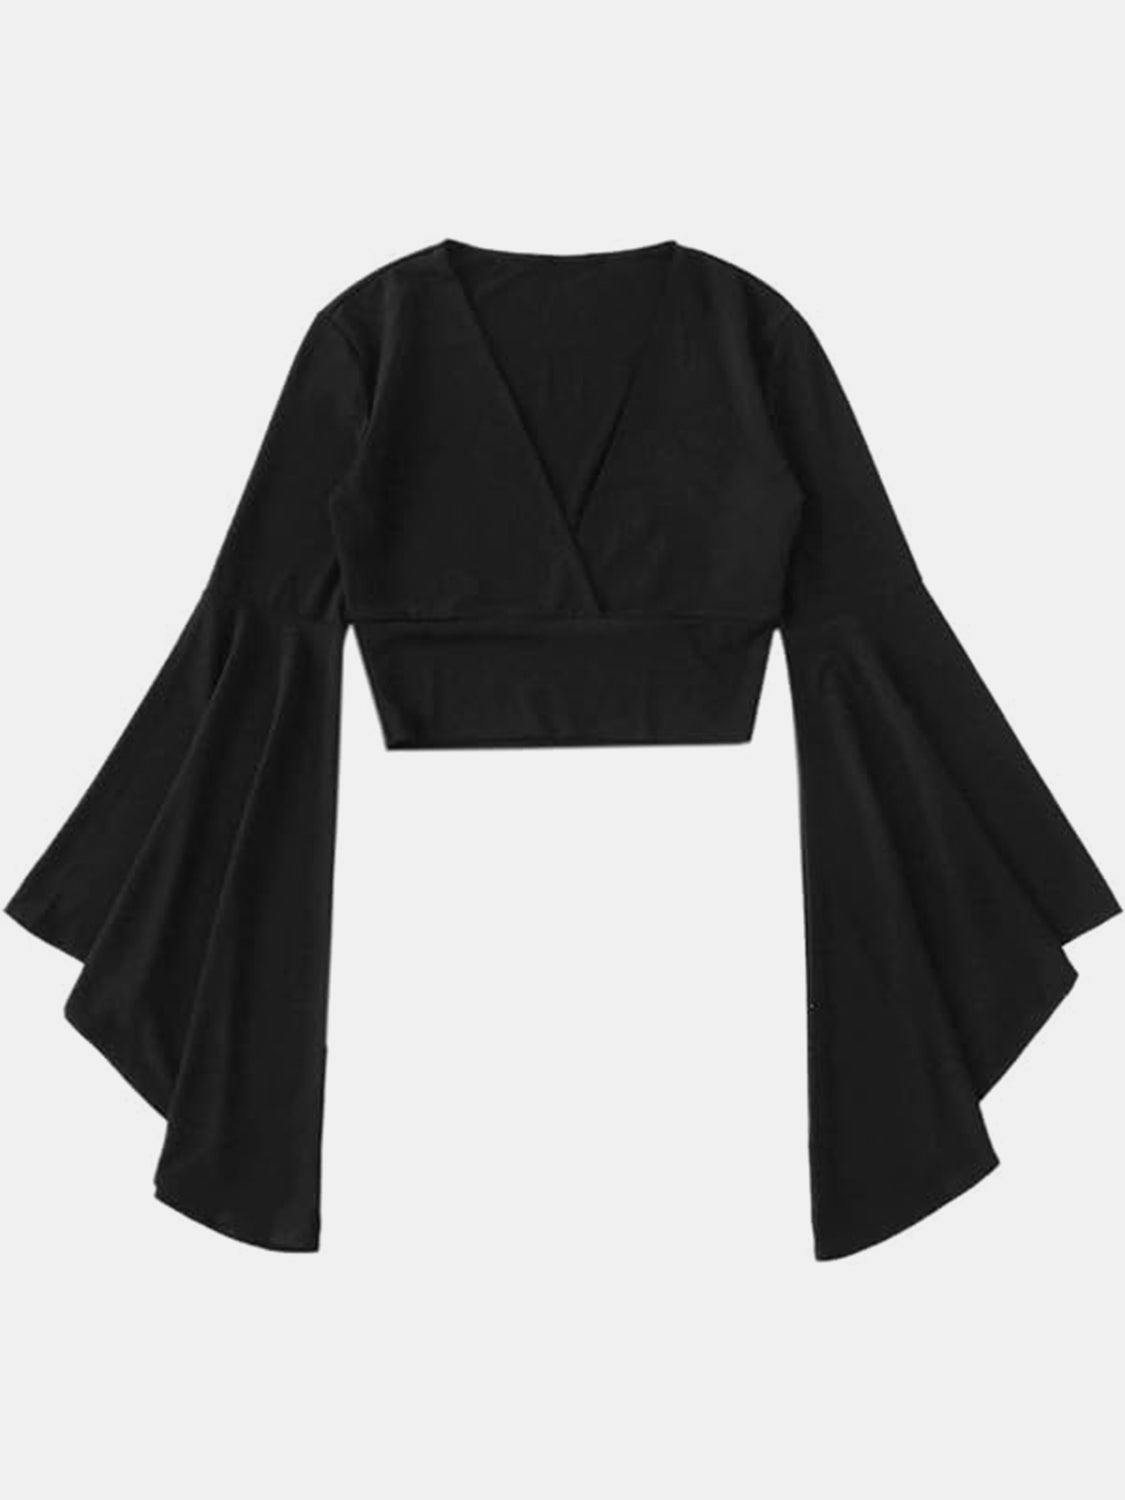 Black Long Sleeve Crop Top Women's Fashion Sexy Plunge Flare Sleeve Blouse